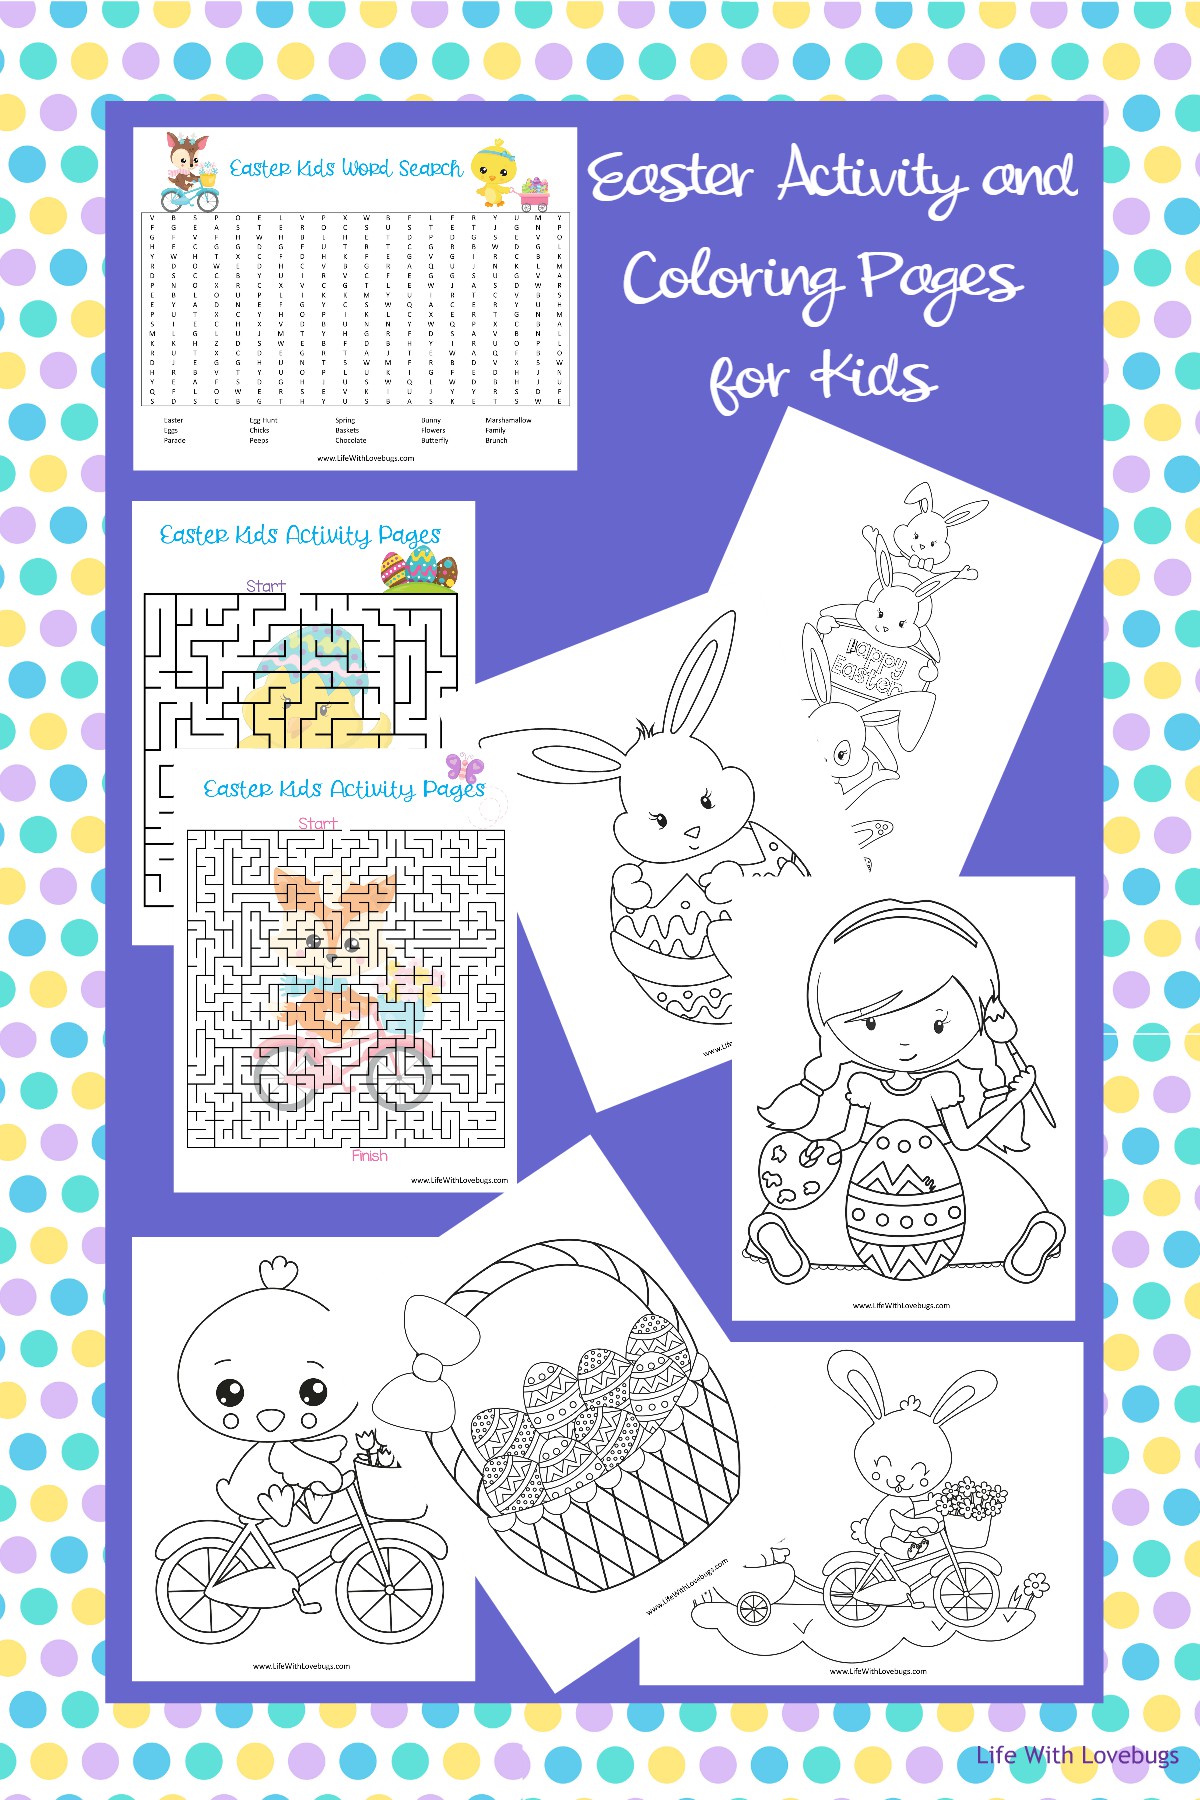 https://www.lifewithlovebugs.com/wp-content/uploads/2016/03/Easter-Activity-and-Coloring-Pages.jpg